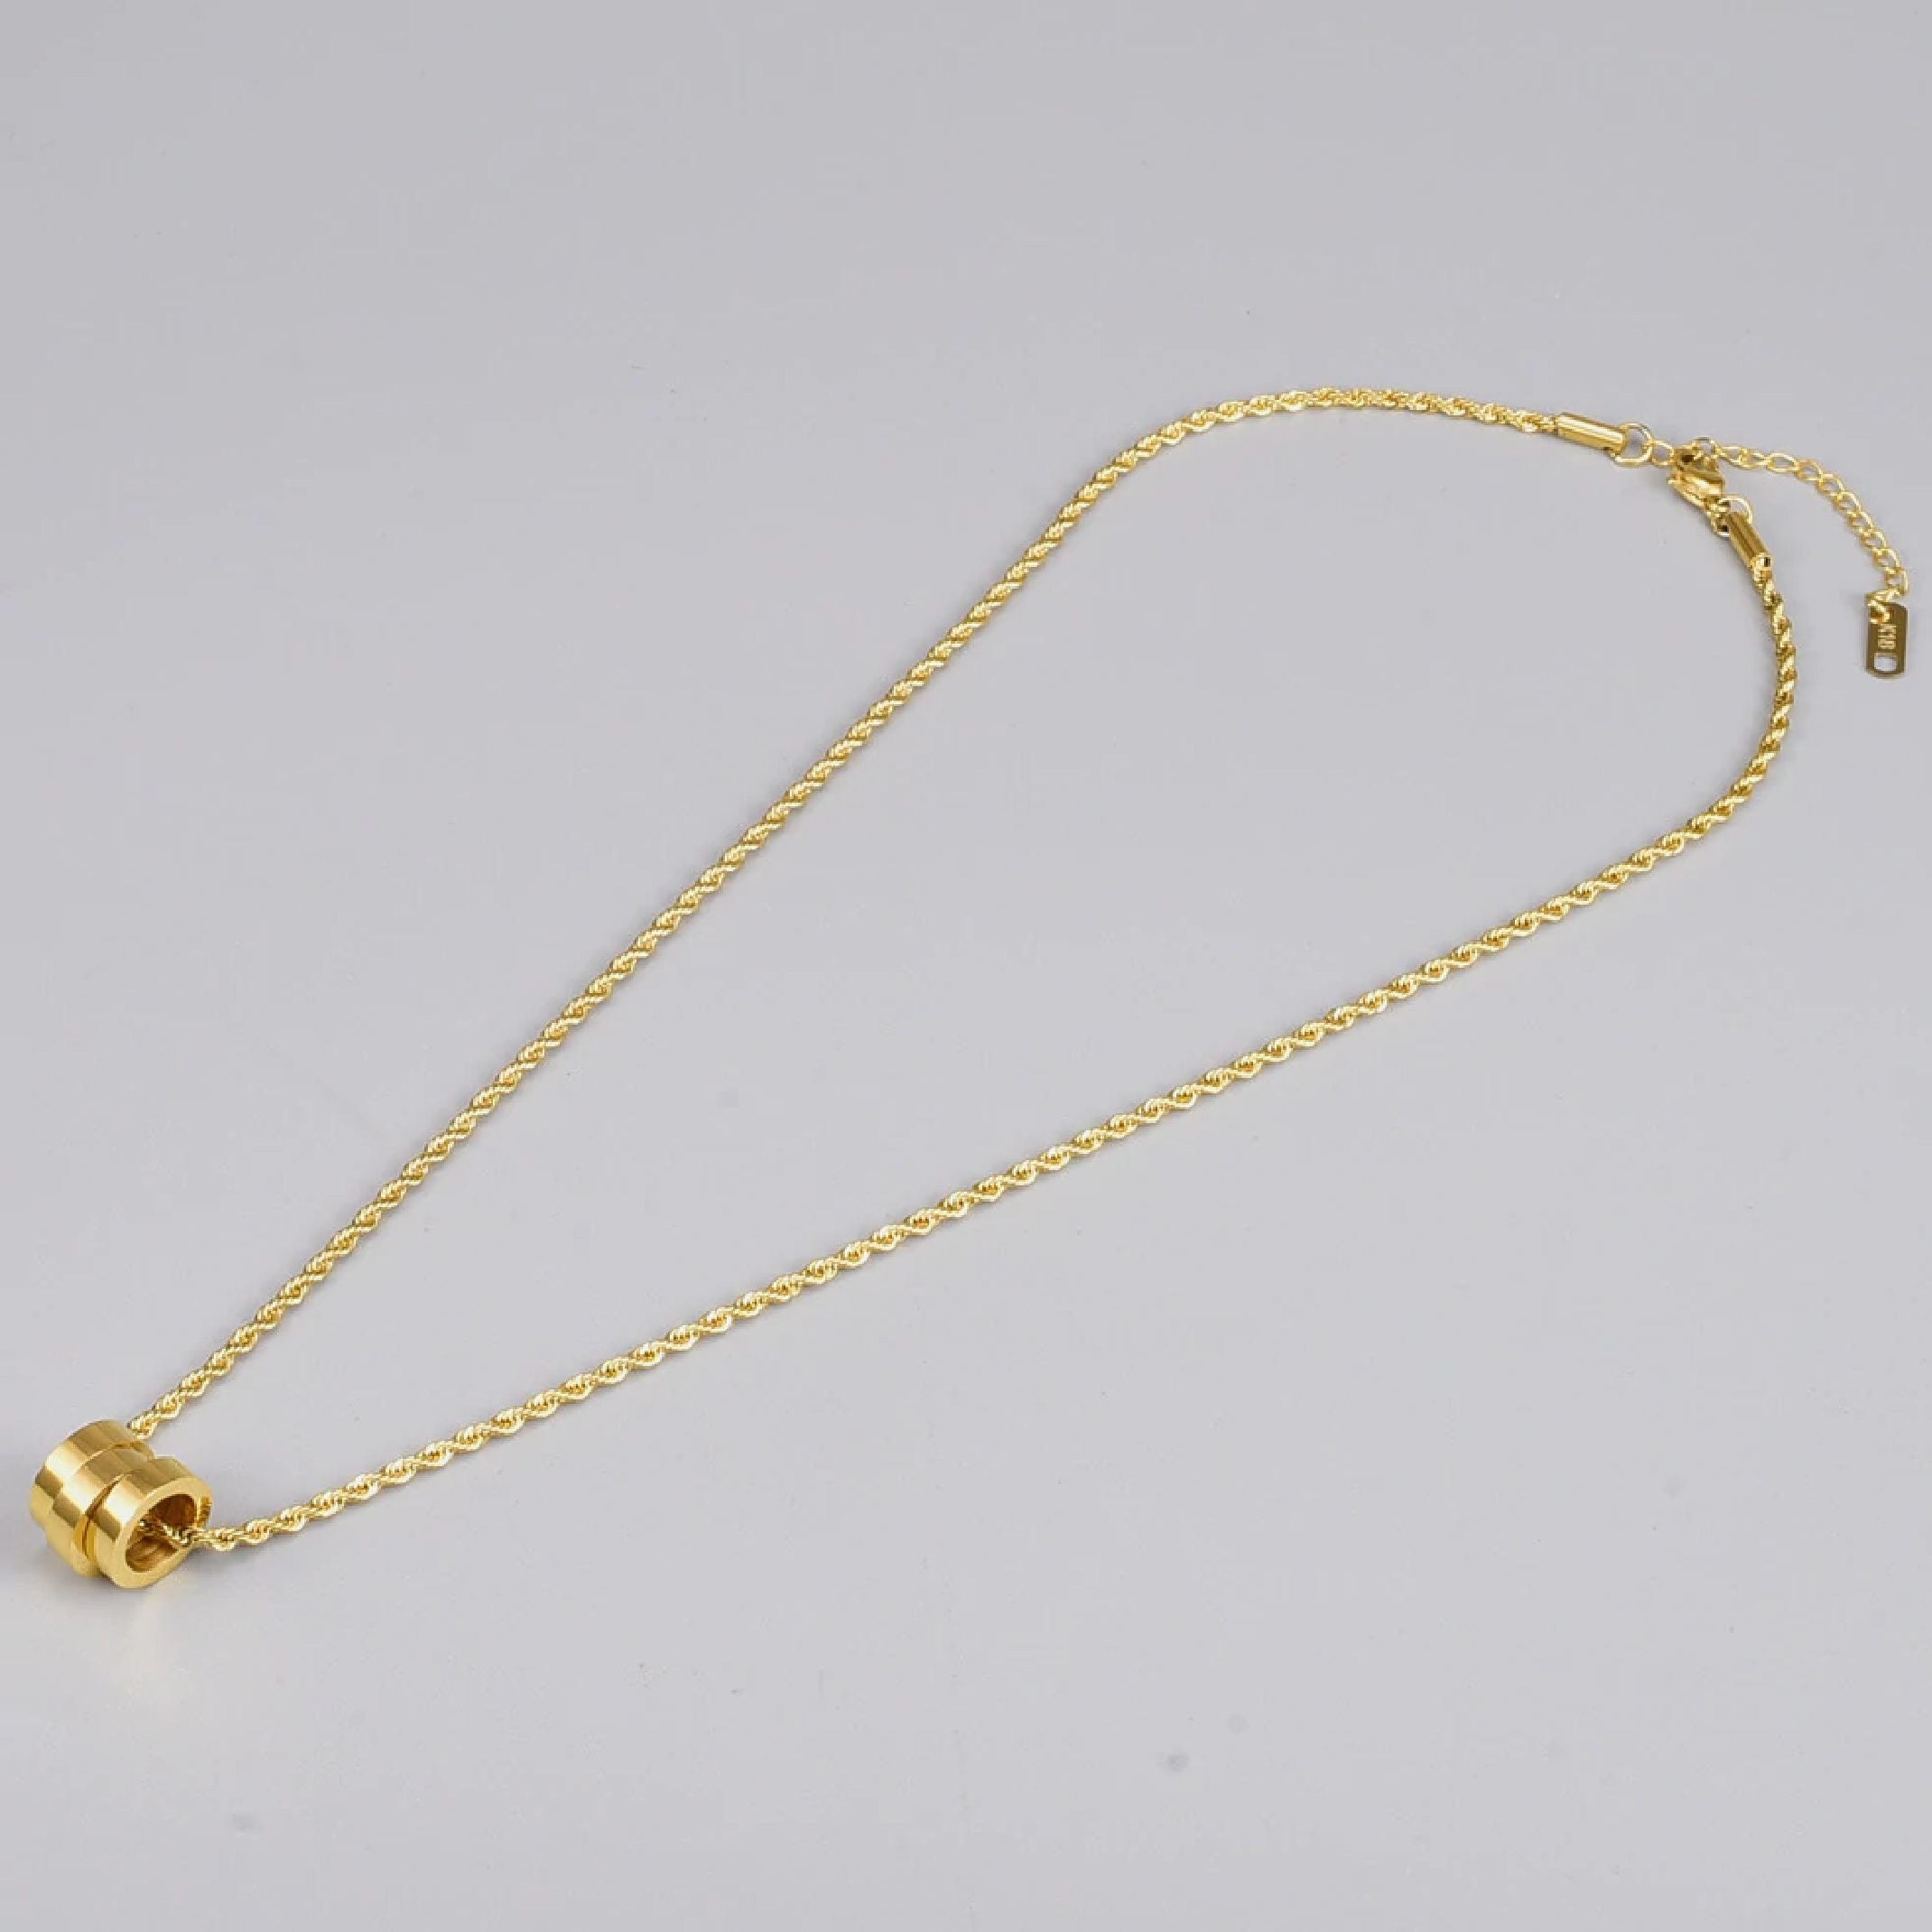 18K Gold Triple Ring Twist Chain Necklace 